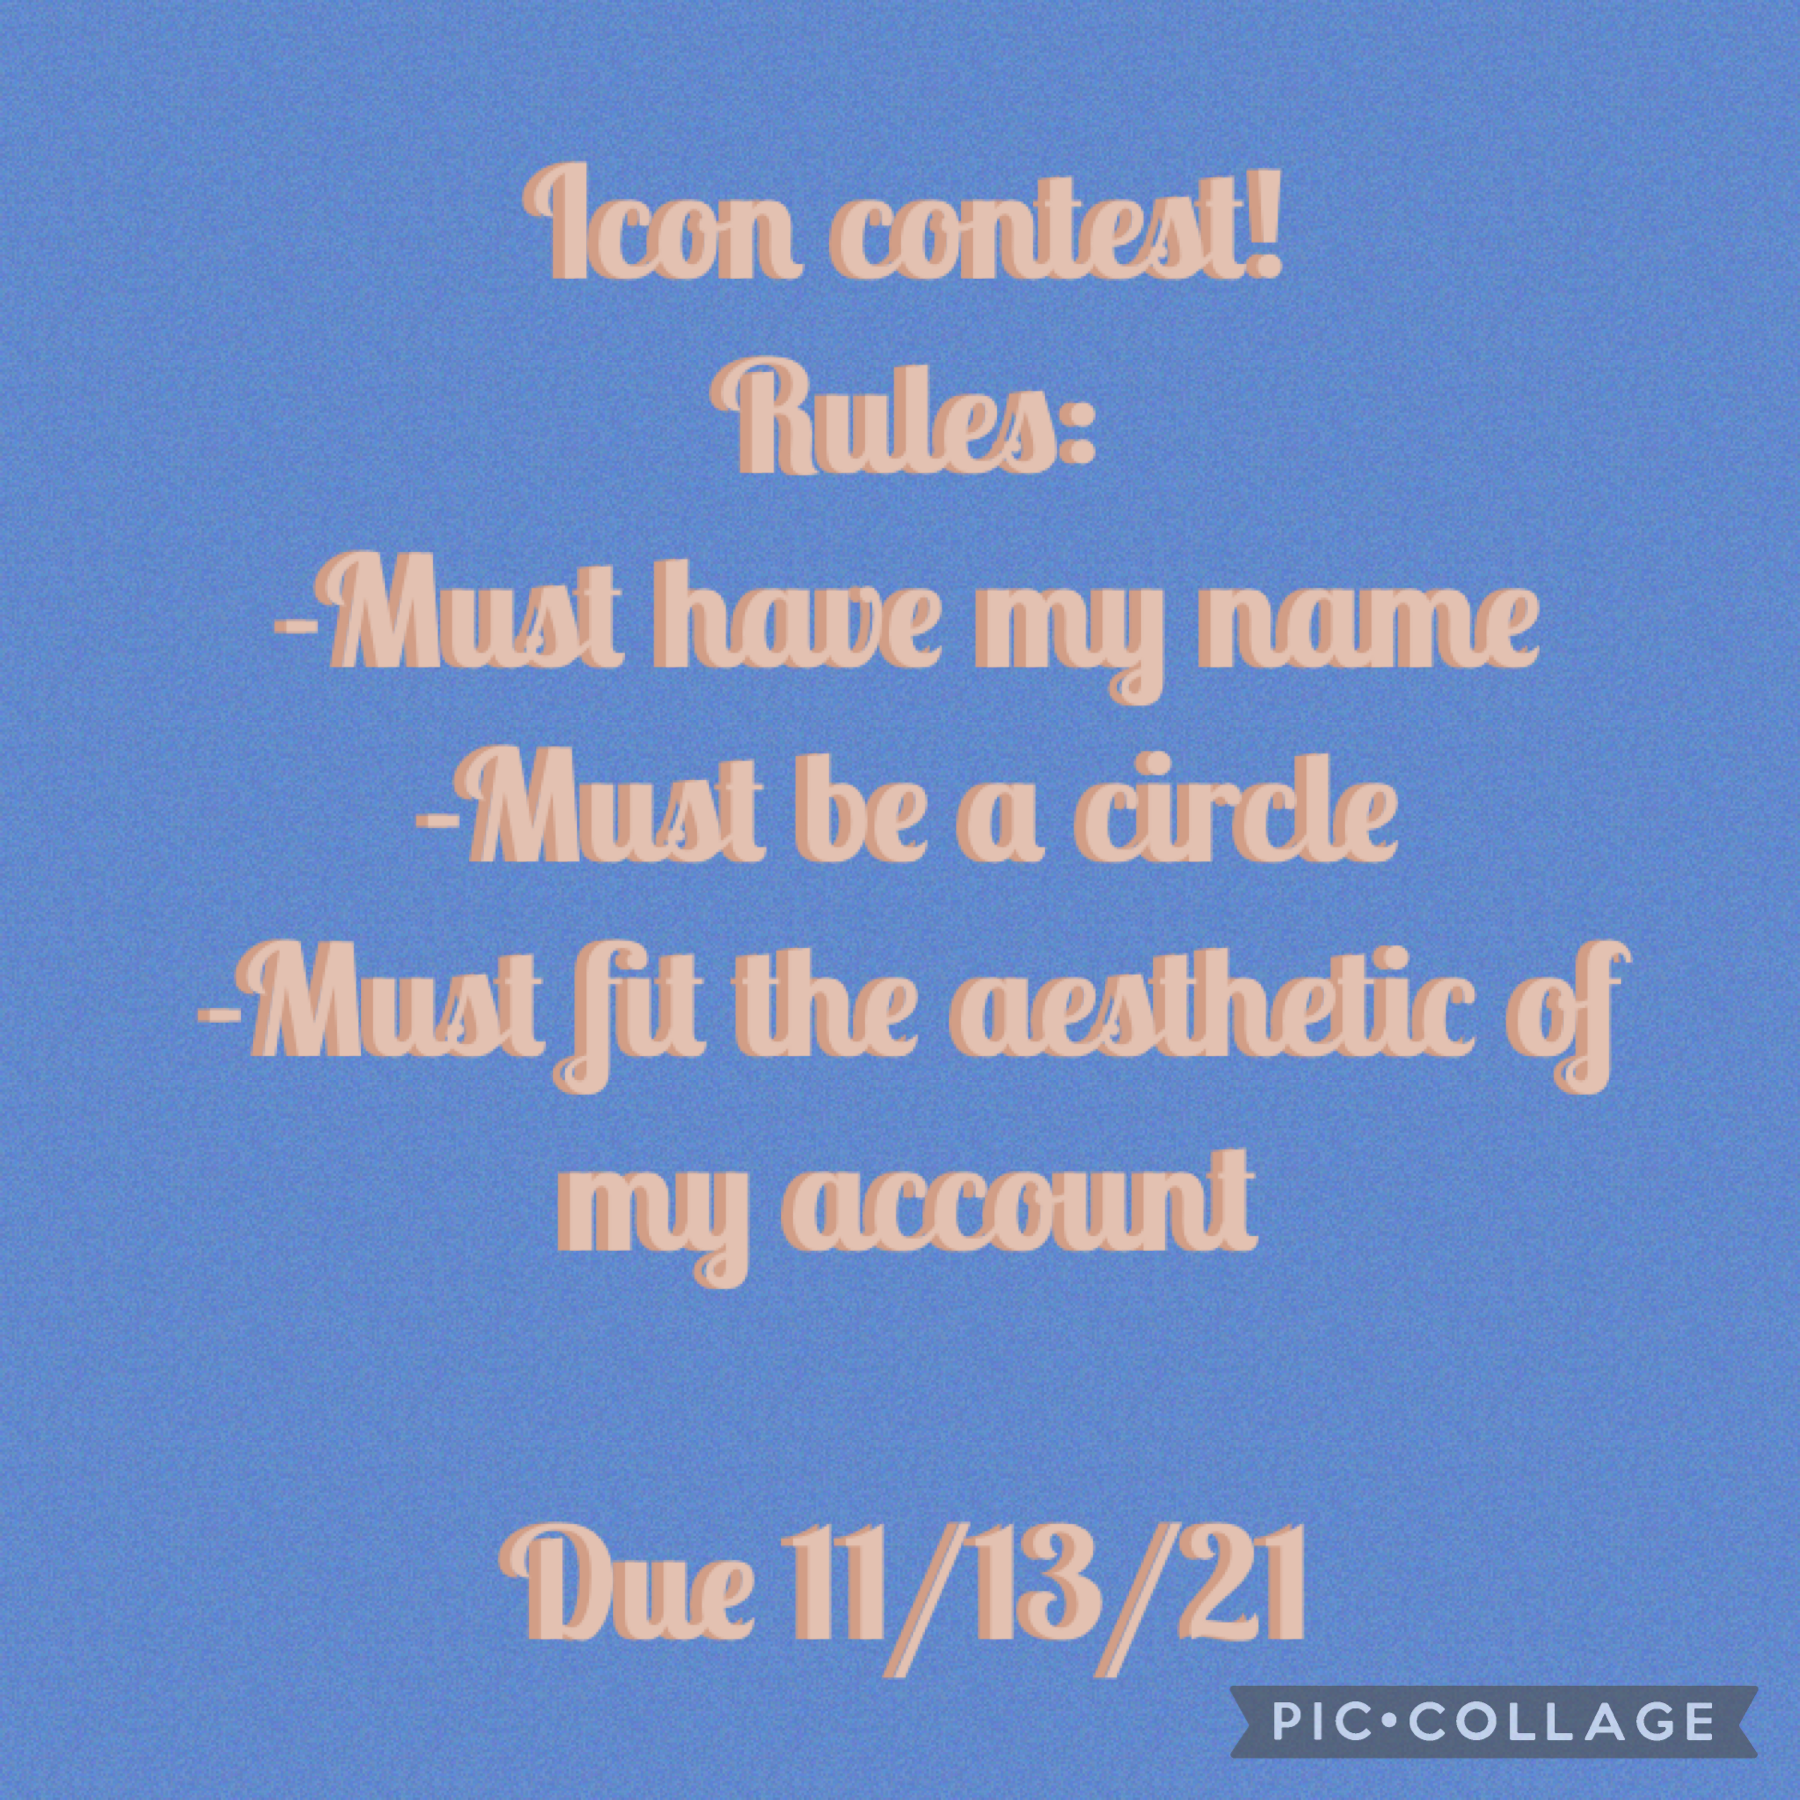 👻11.1.21👻

I’m kinda redoing the aesthetic of my account, and I’ve had this icon for a while so it’s time to switch it up!

Probably will be judged on 11.14.21 or late 11.13.21. Depends on when I have time.